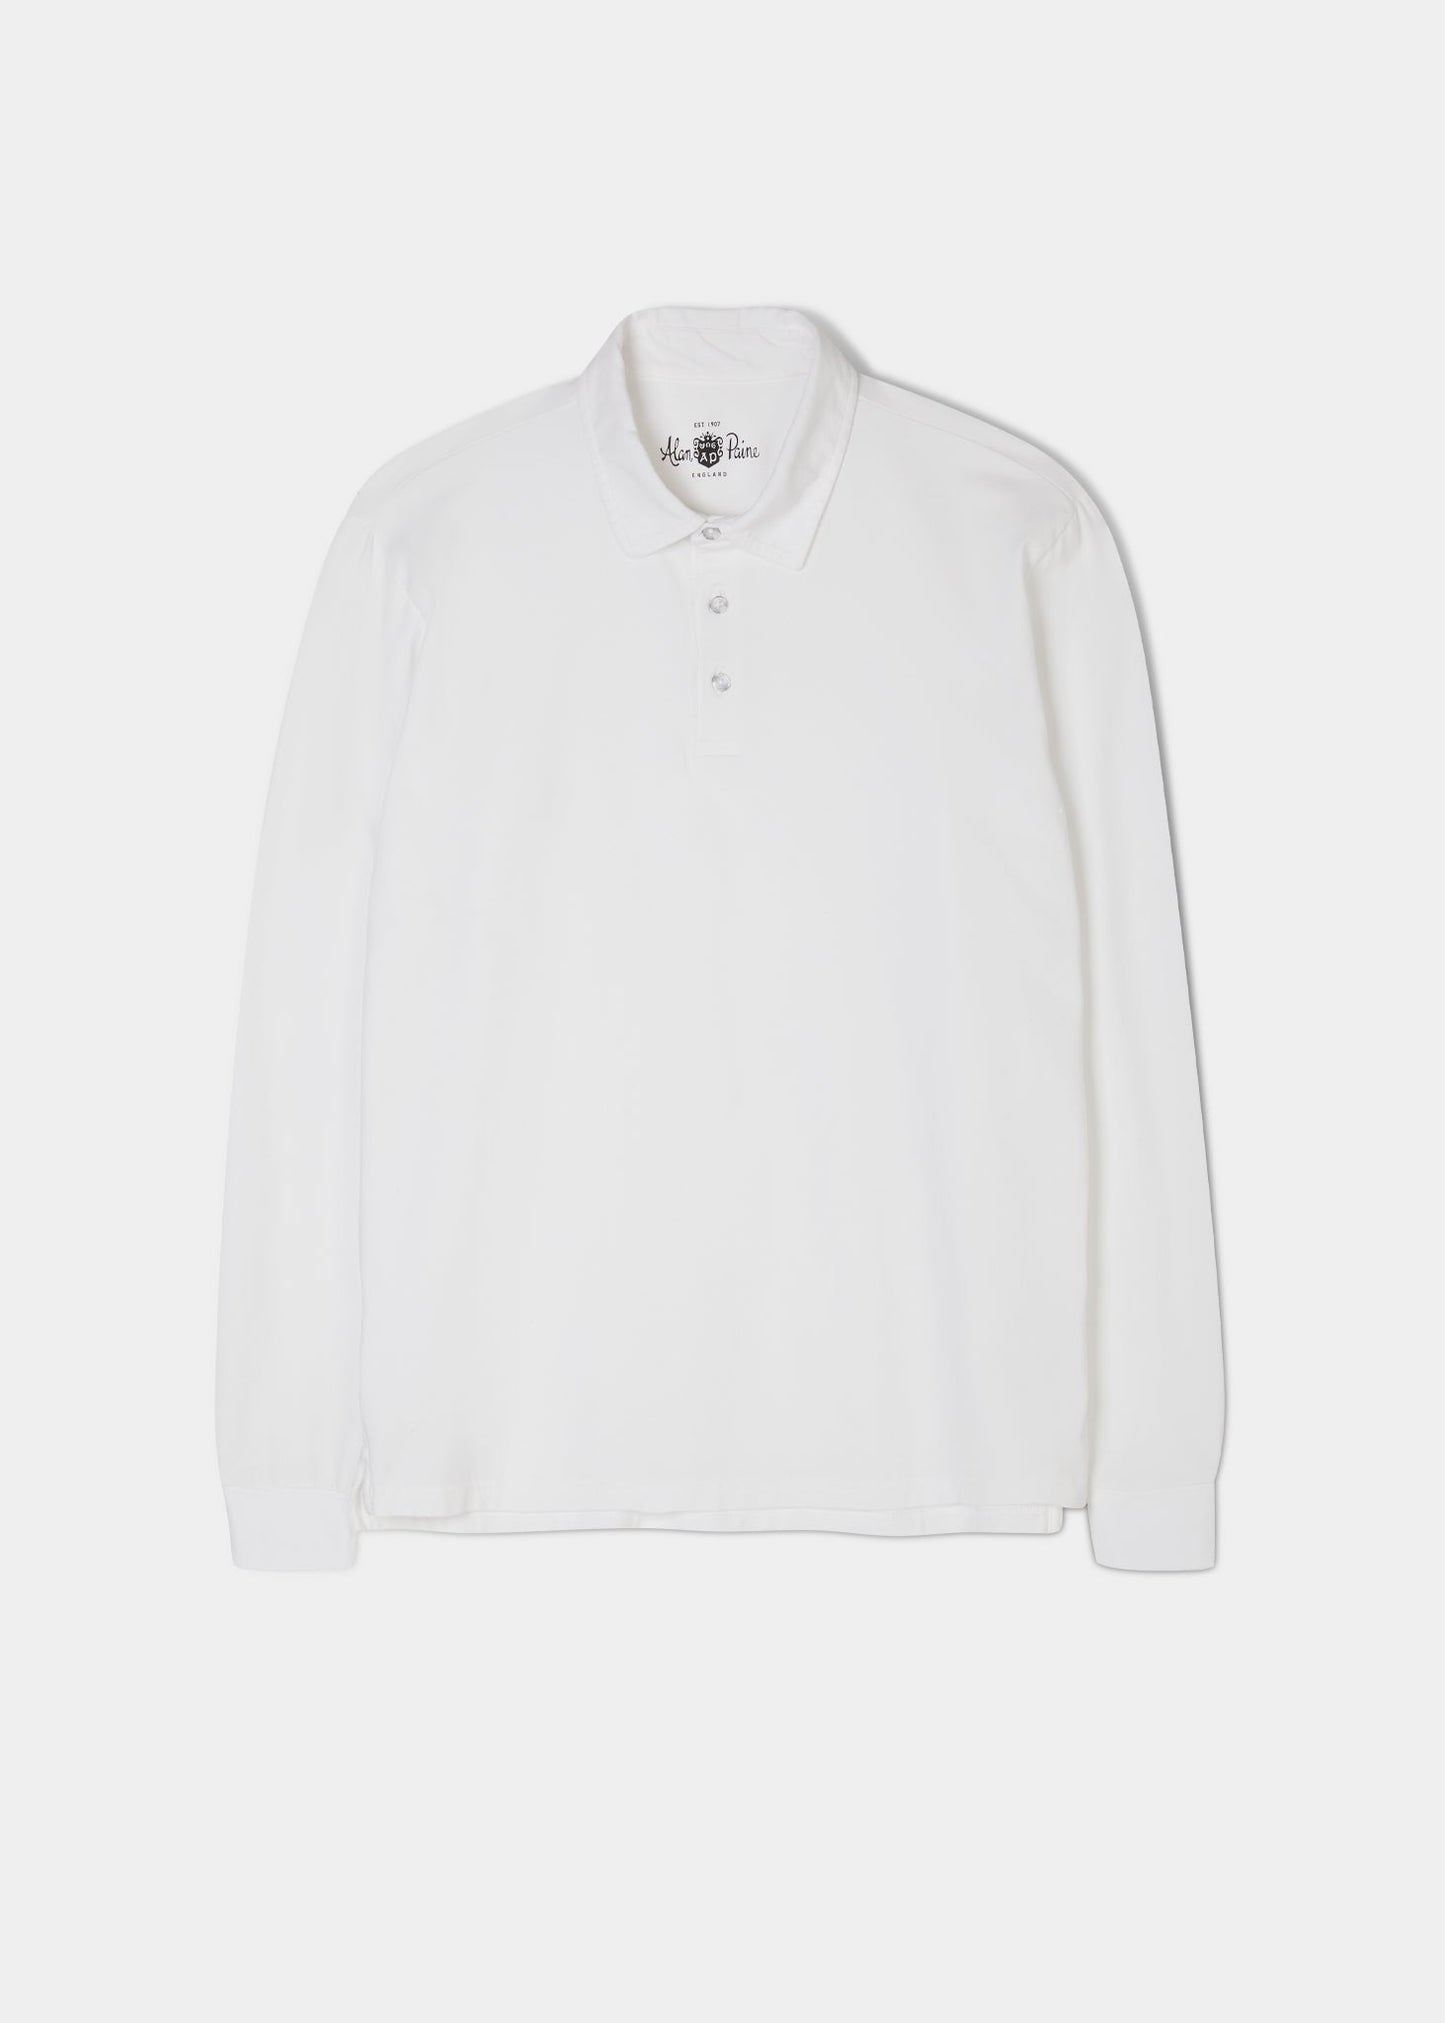 Faded dye polo shirt in white made from a cotton/ spandex blend.